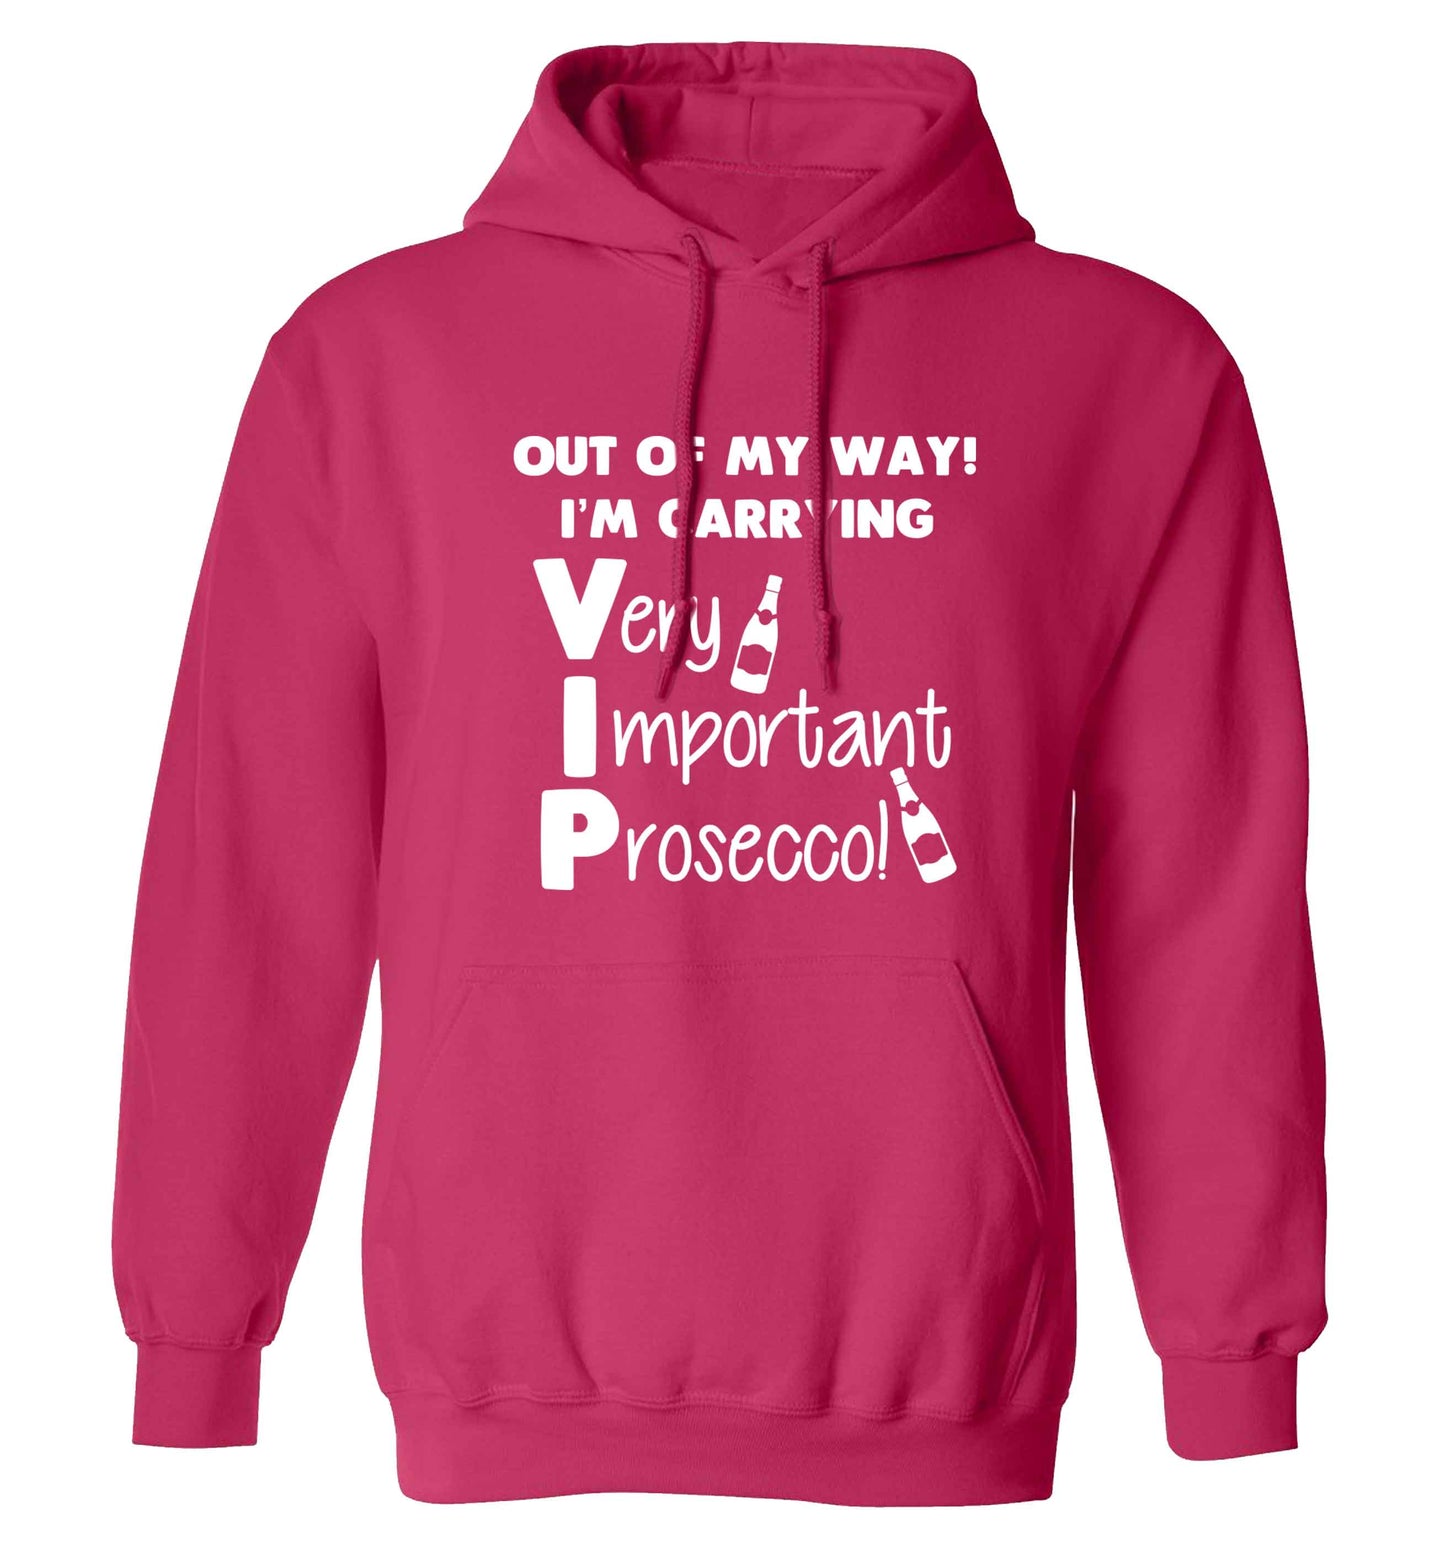 Out of my way I'm carrying very important prosecco! adults unisex pink hoodie 2XL